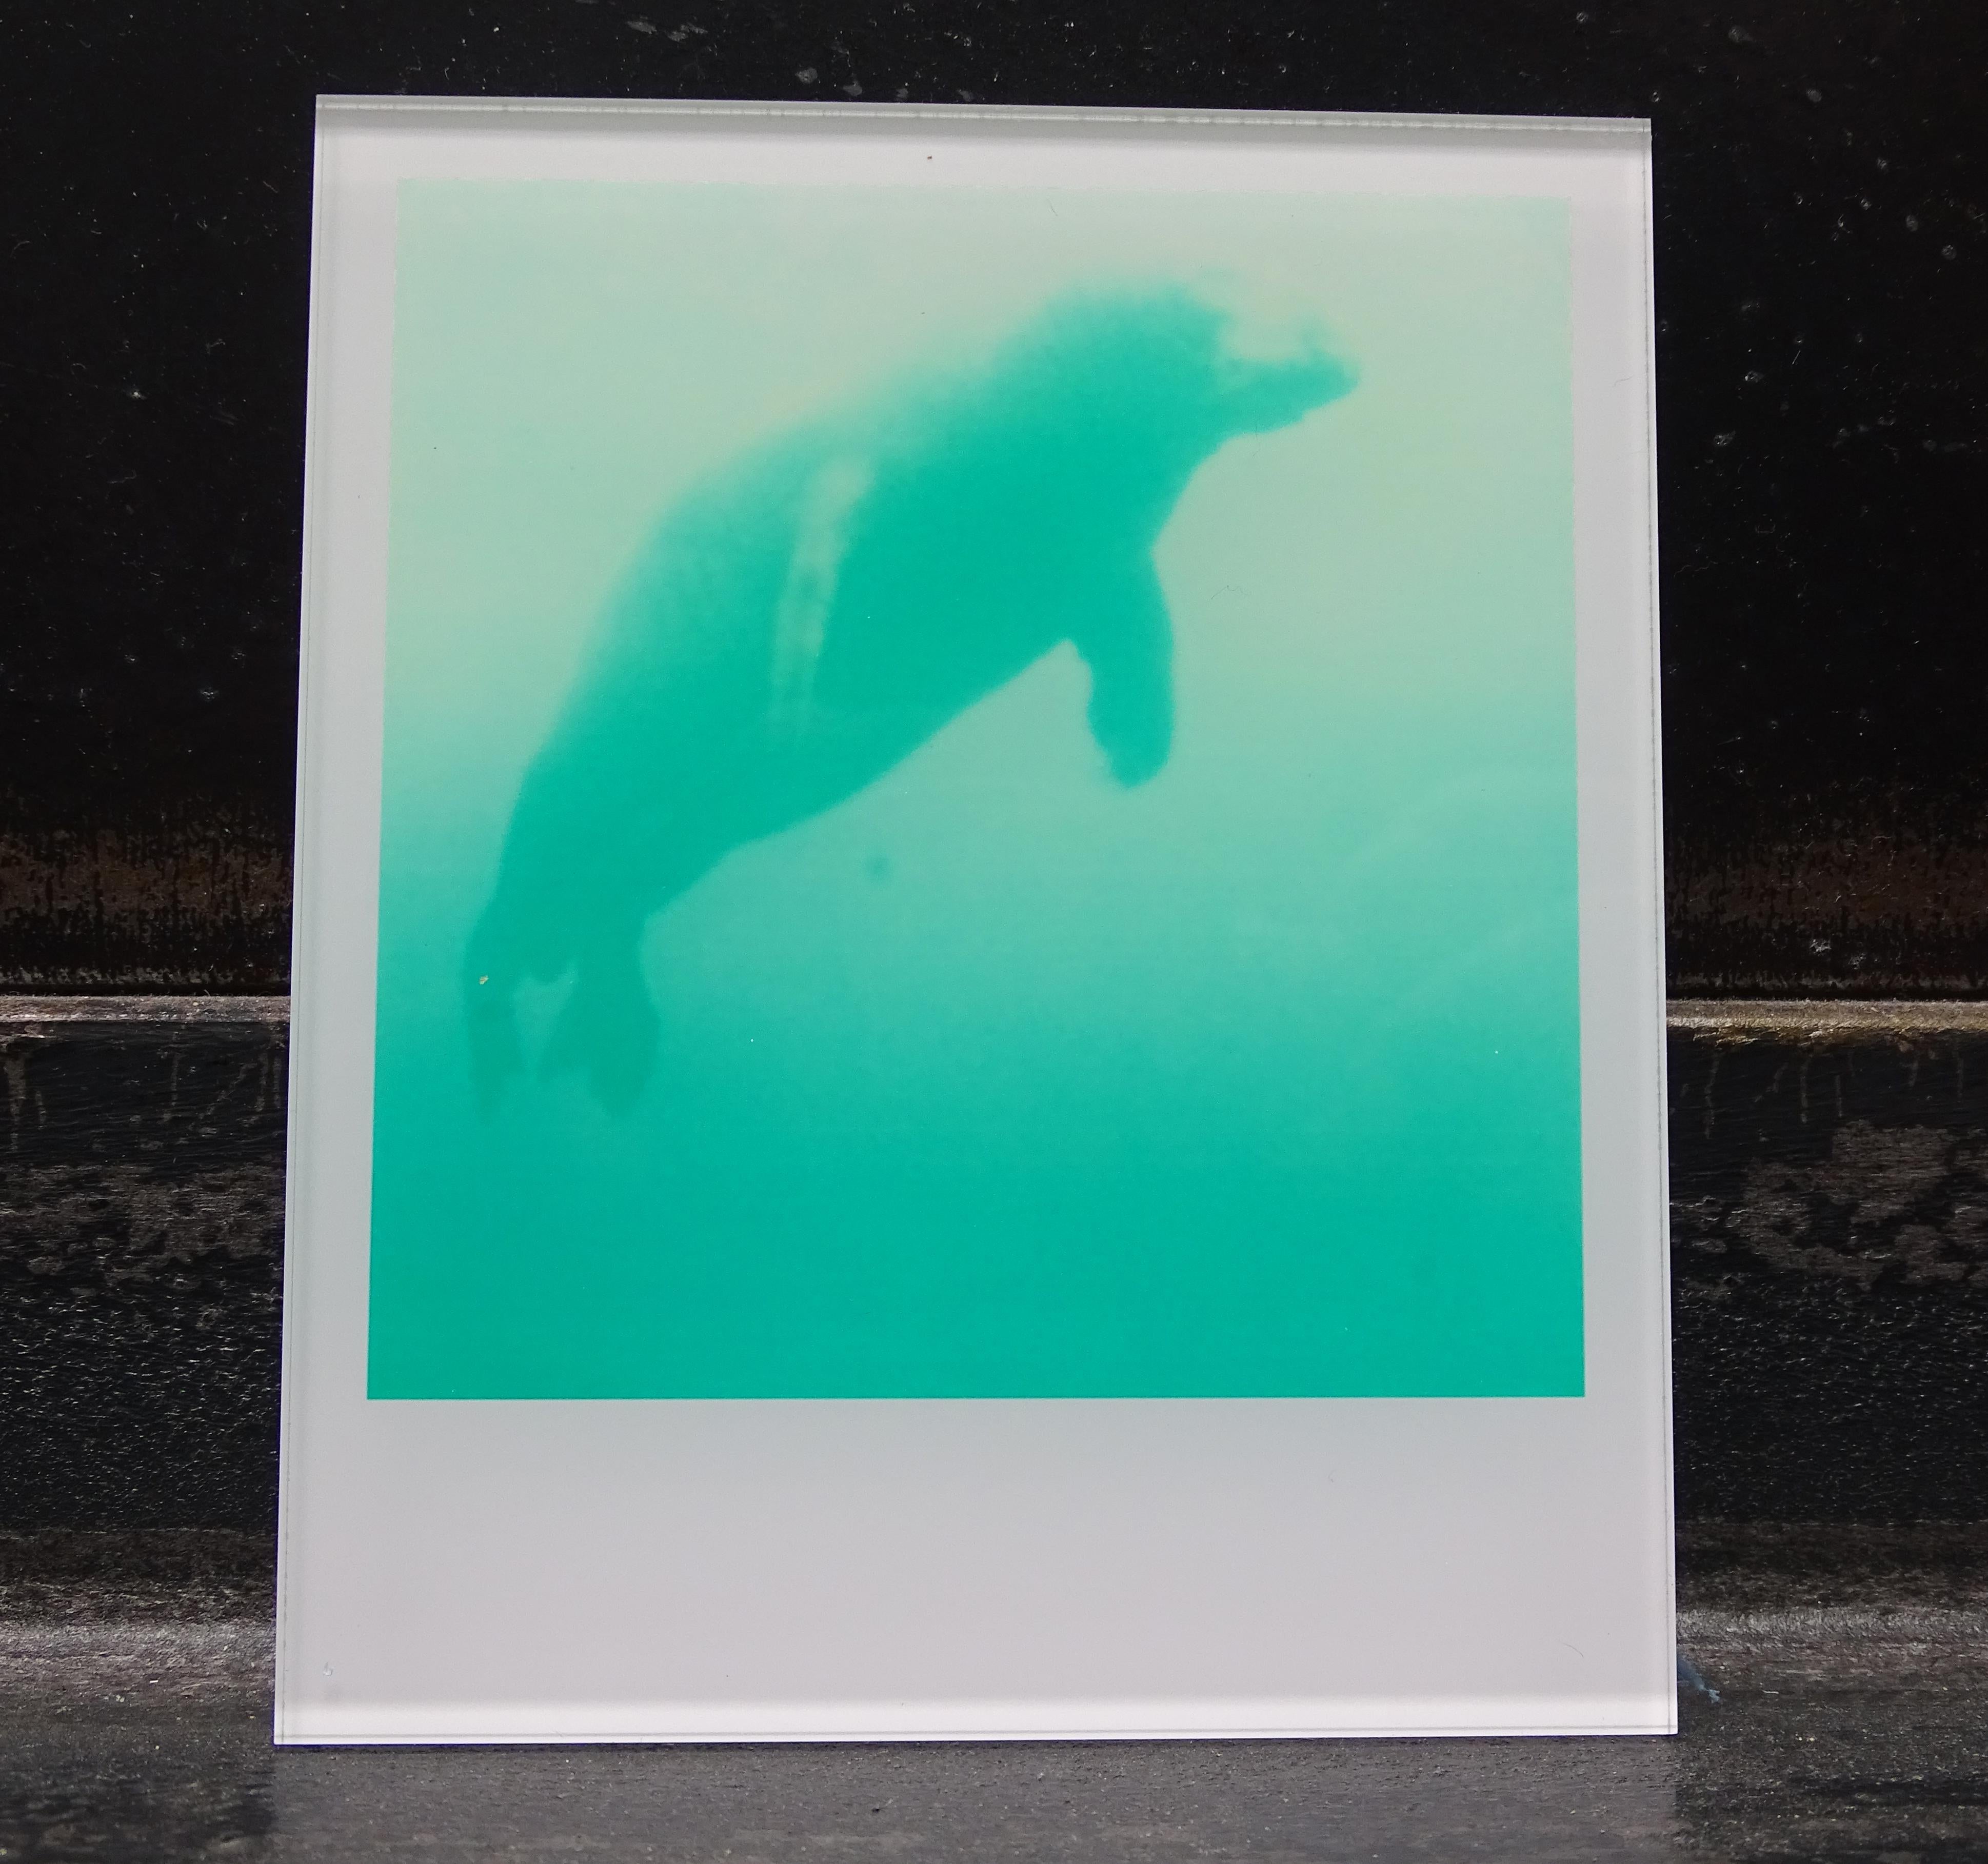 Stefanie Schneider's Minis

Skywhale (Stay), 2006
signed and signature brand on verso
Lambda Color Photographs based on the  Polaroid. 

from the movie 'Stay' by Marc Forster, featuring Ewan McGregor and Naomi Watts.

Polaroid sized open Editions